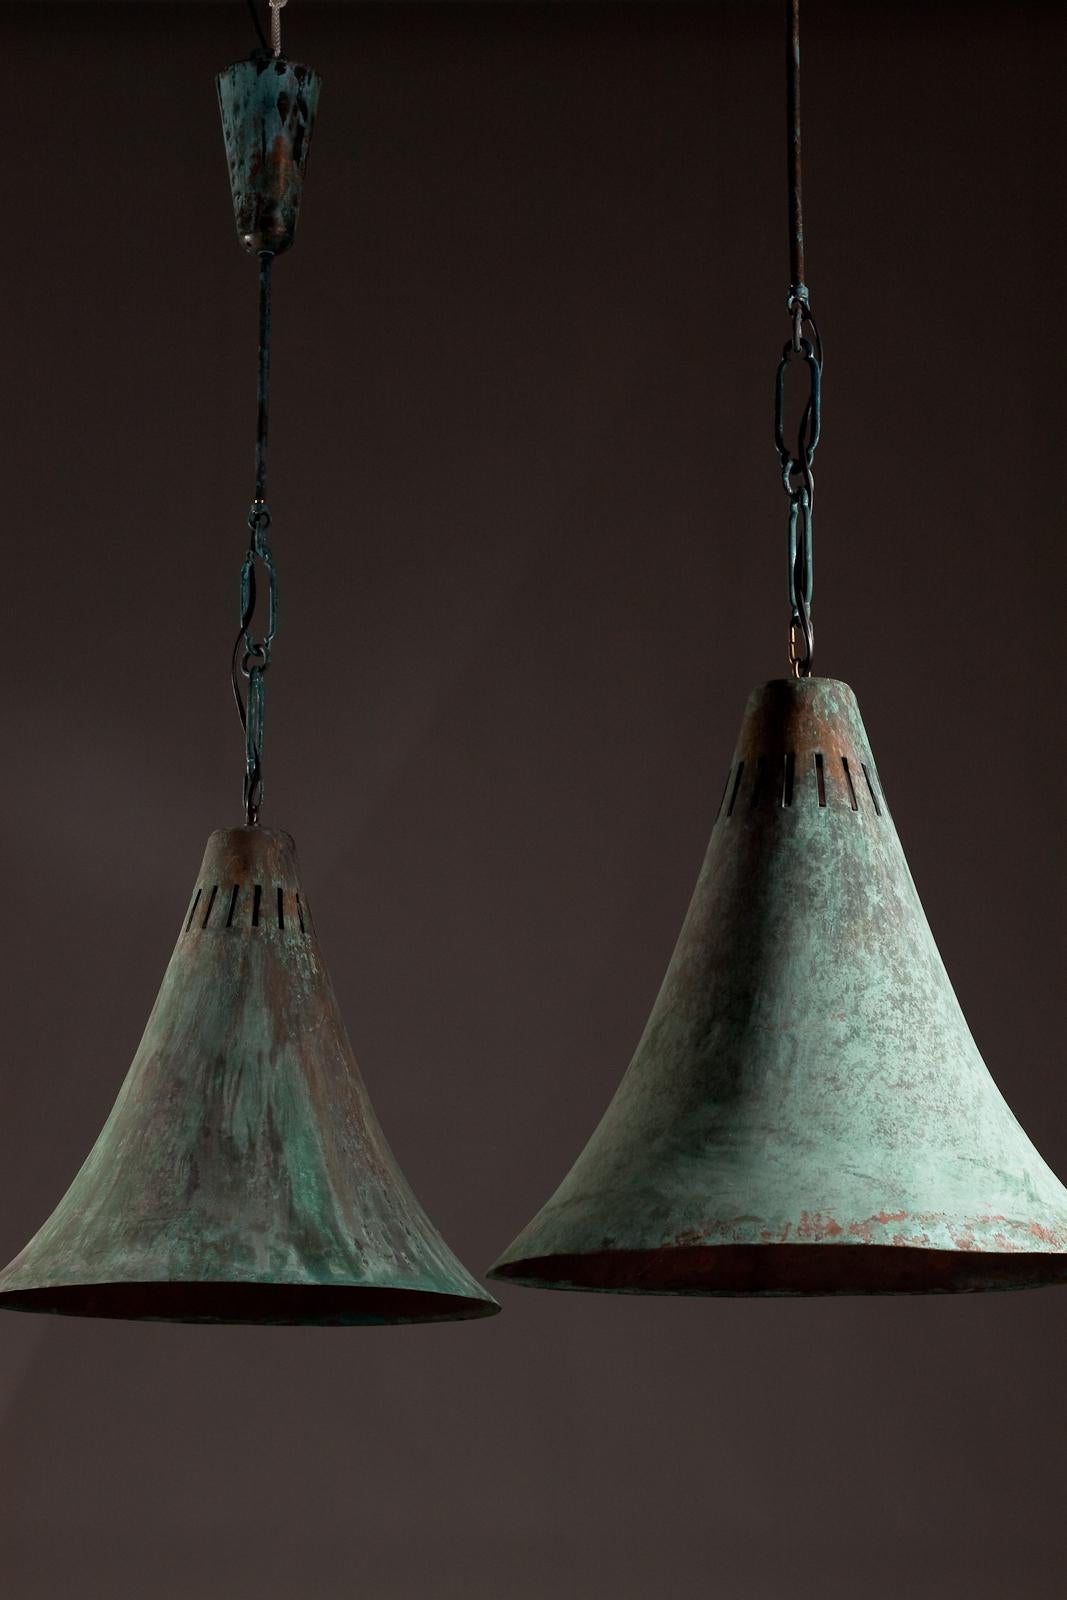 Introducing a pair of exquisite Finnish XL size industrial pendants from the 1930/40's era. These stunning lamps are made from oxidized copper, giving them the perfect patina for a rustic, industrial feel. Their adjustable height feature allows you